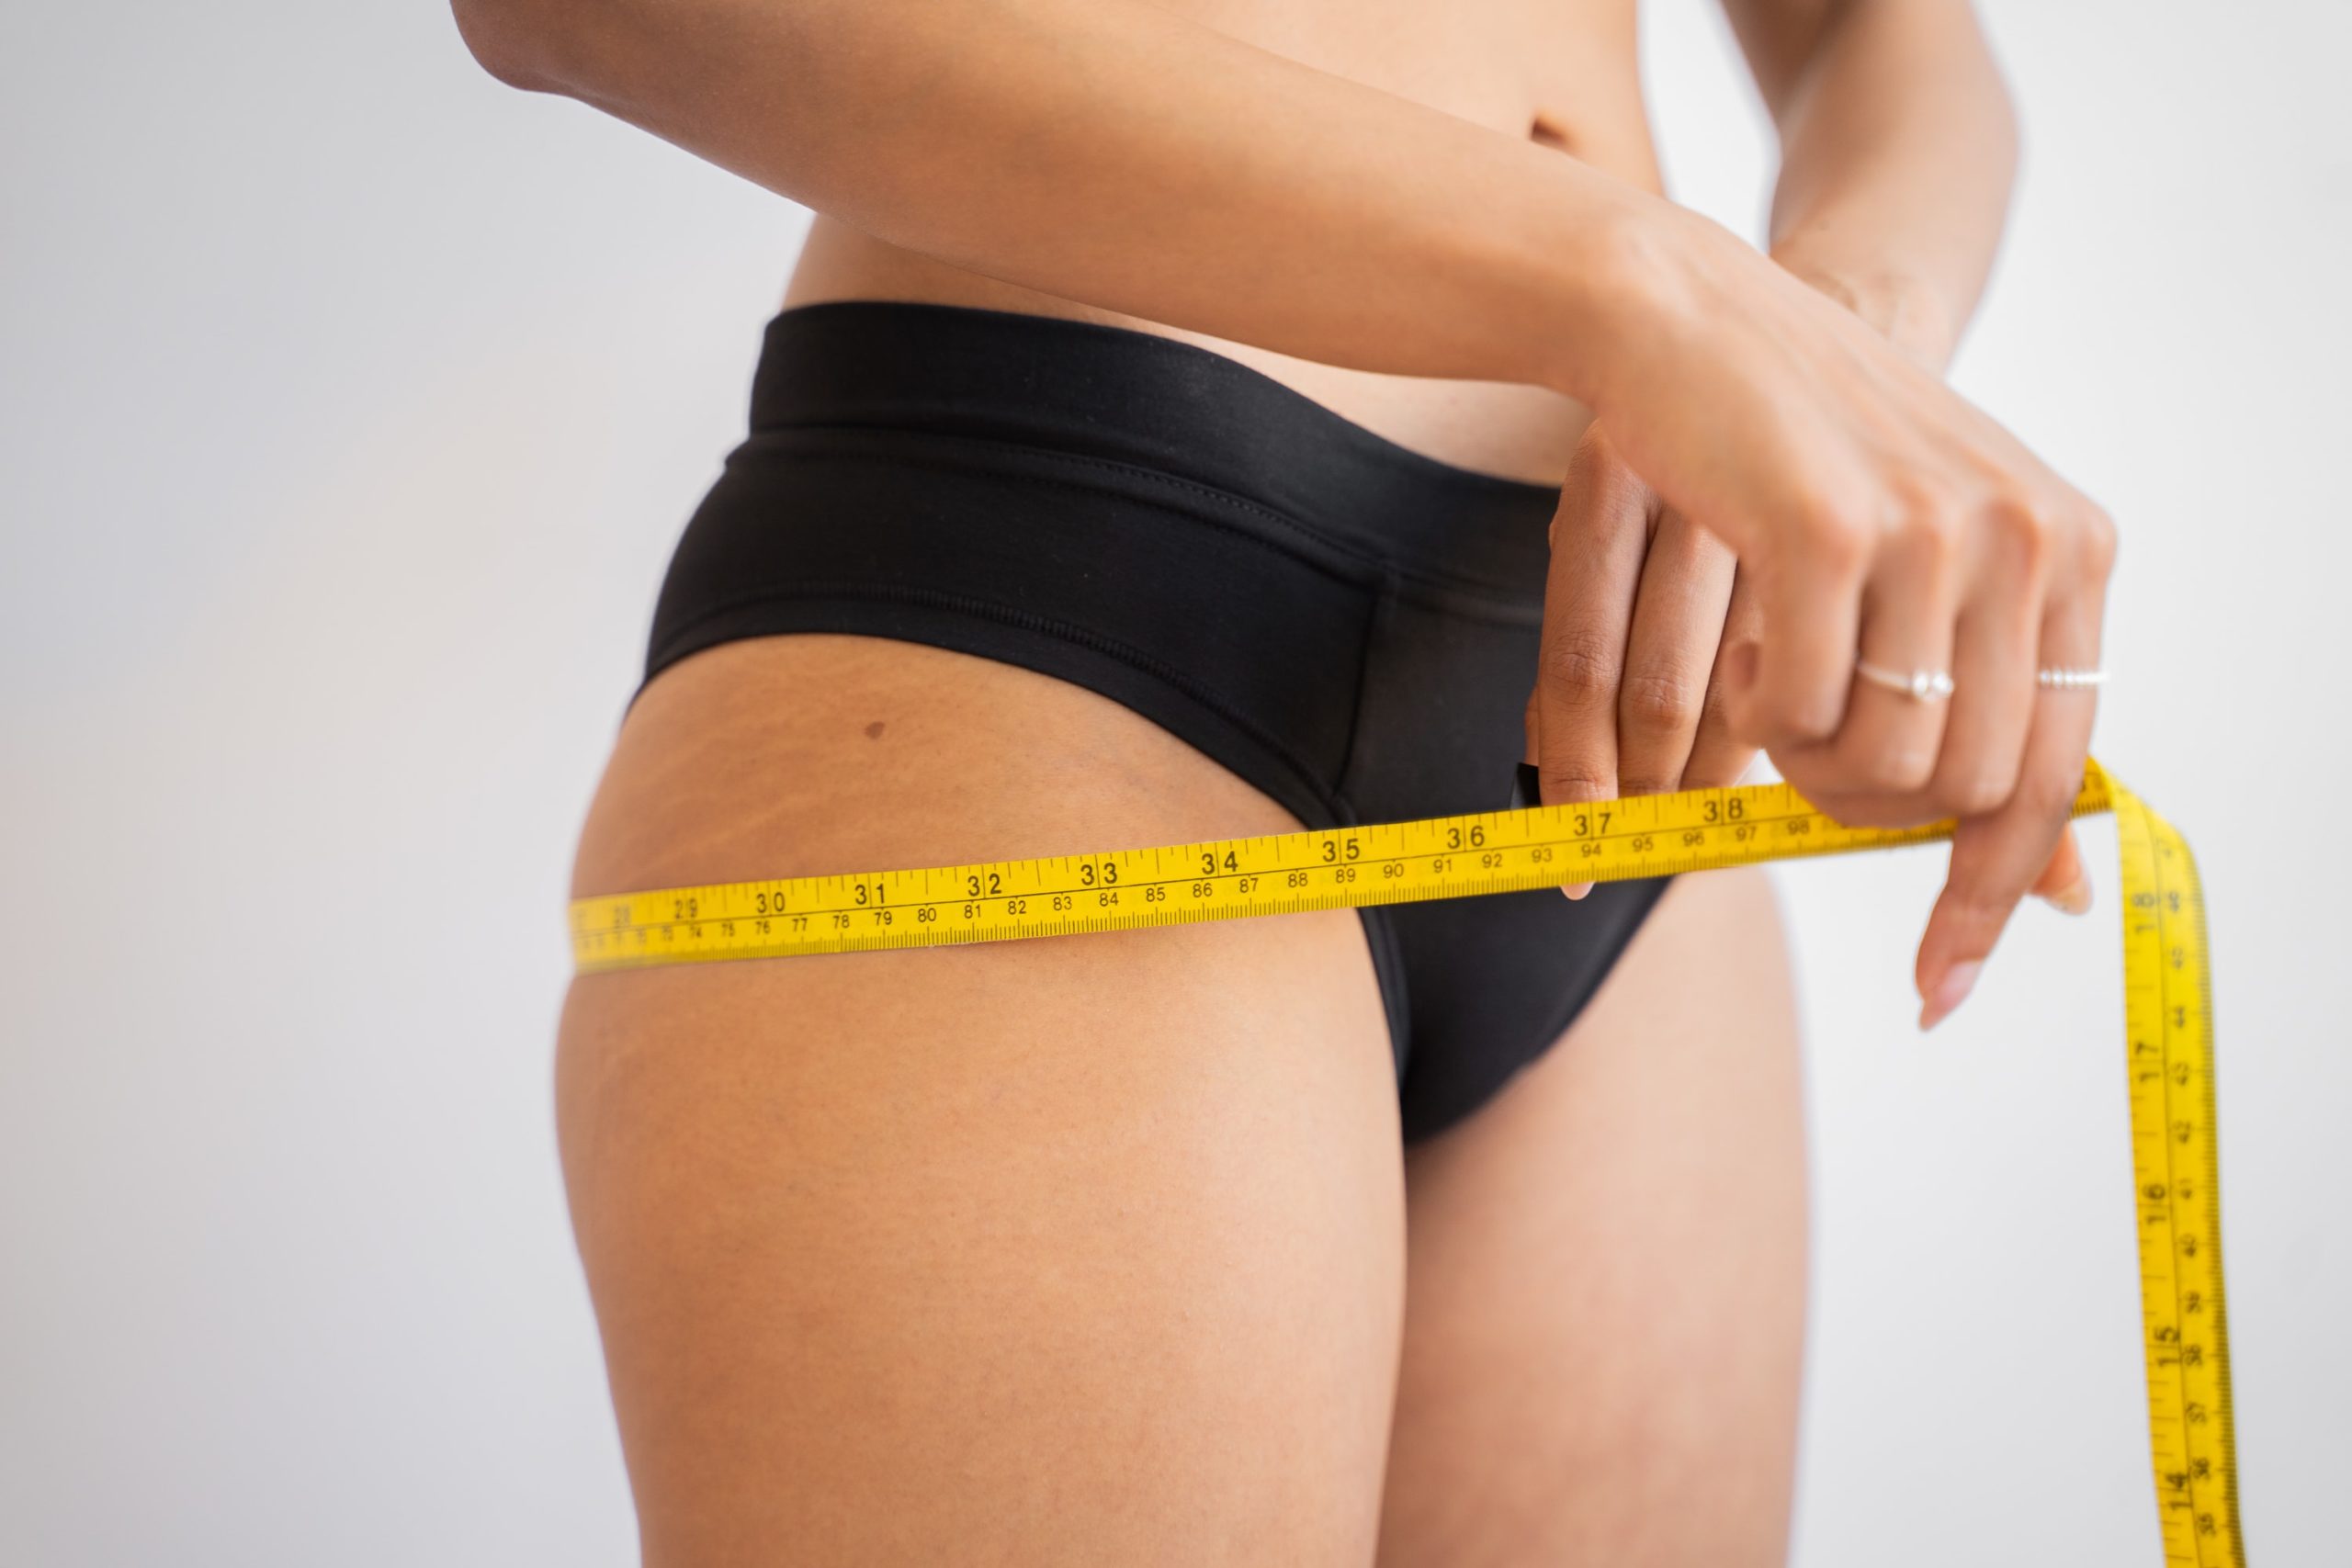 how your body image affects your self asteem by dr. kristi overstreet